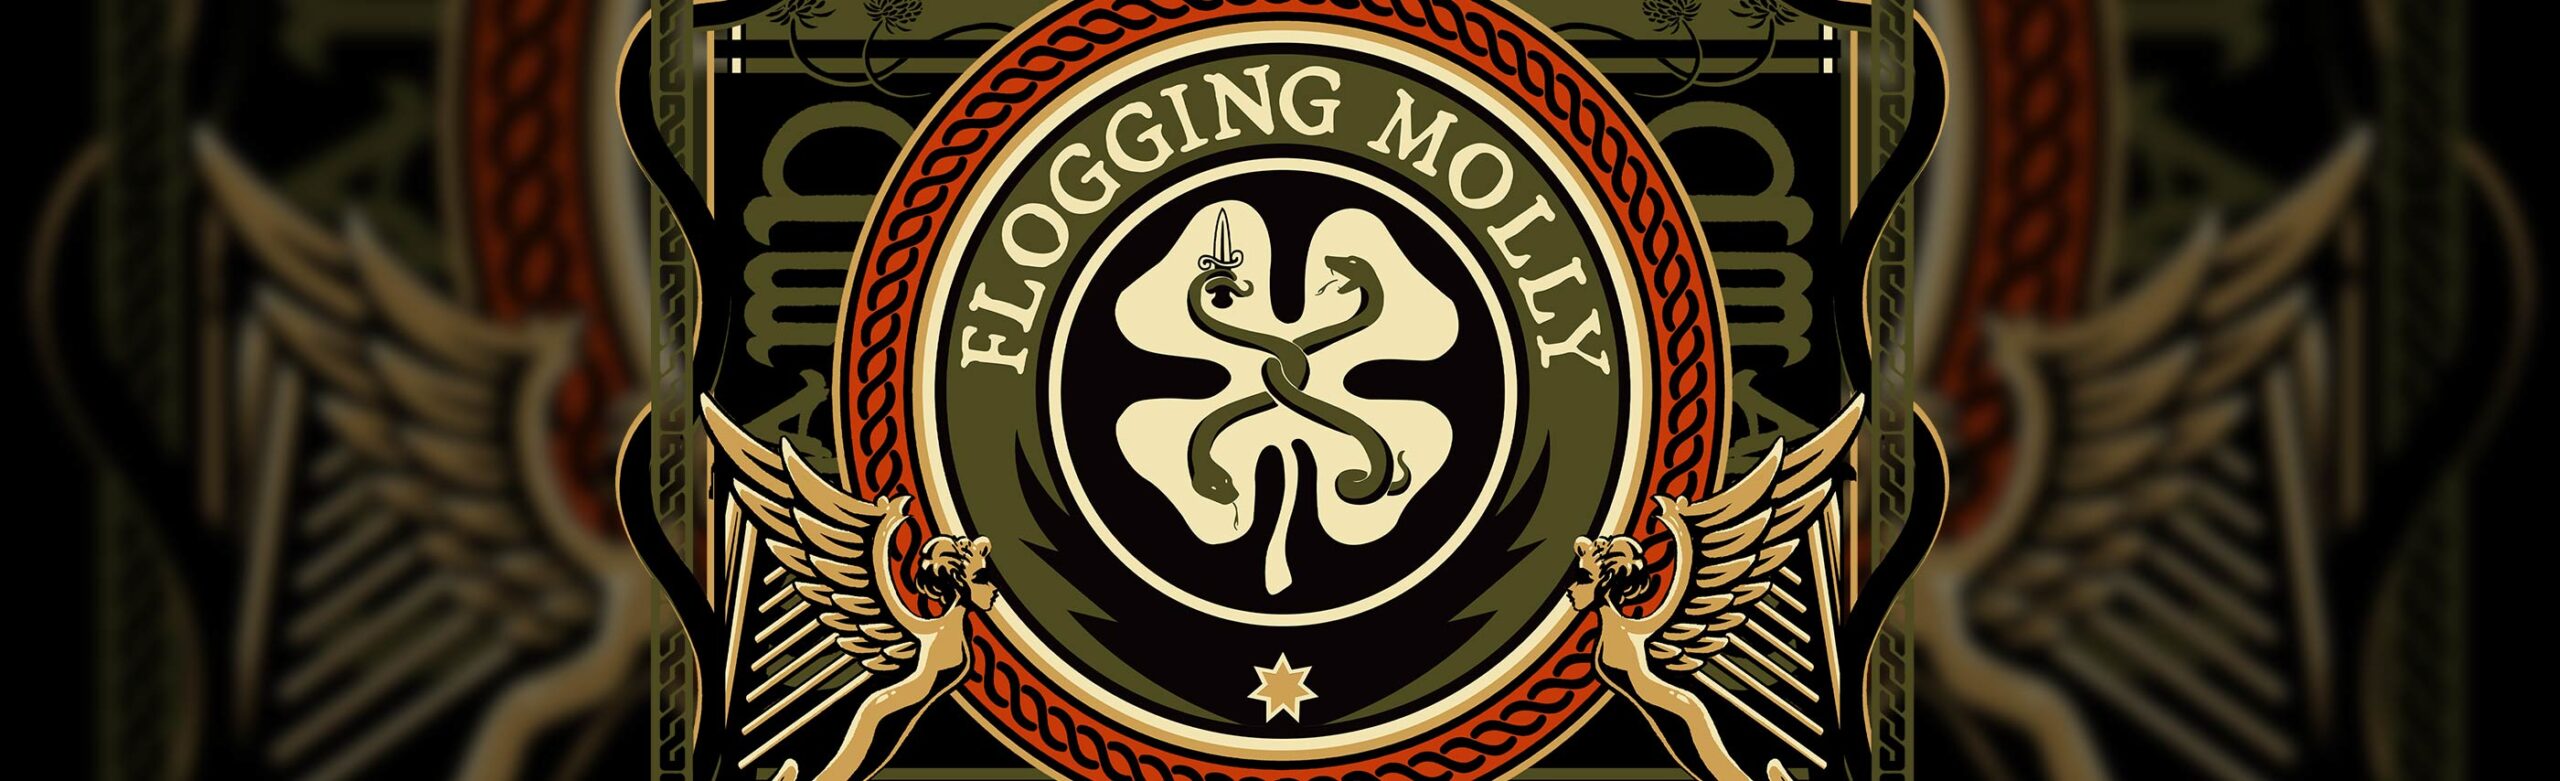 Flogging Molly Confirms Concerts at The ELM and The Wilma with The Bronx Image